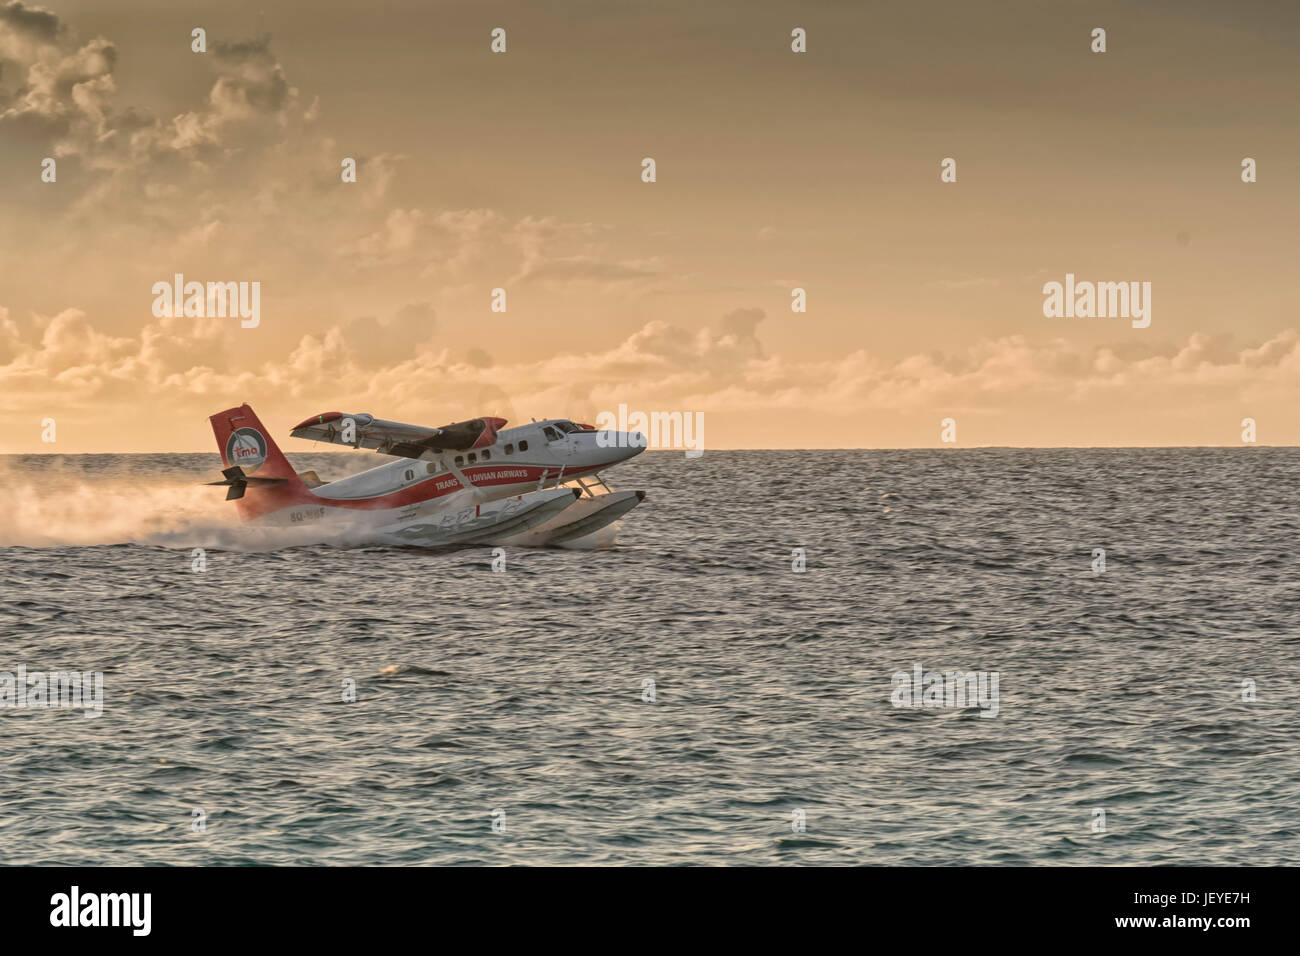 A Trans Maldivian Airways Twin Otter seaplane accelerates for takeoff from Meedhupparu island Maldives Stock Photo